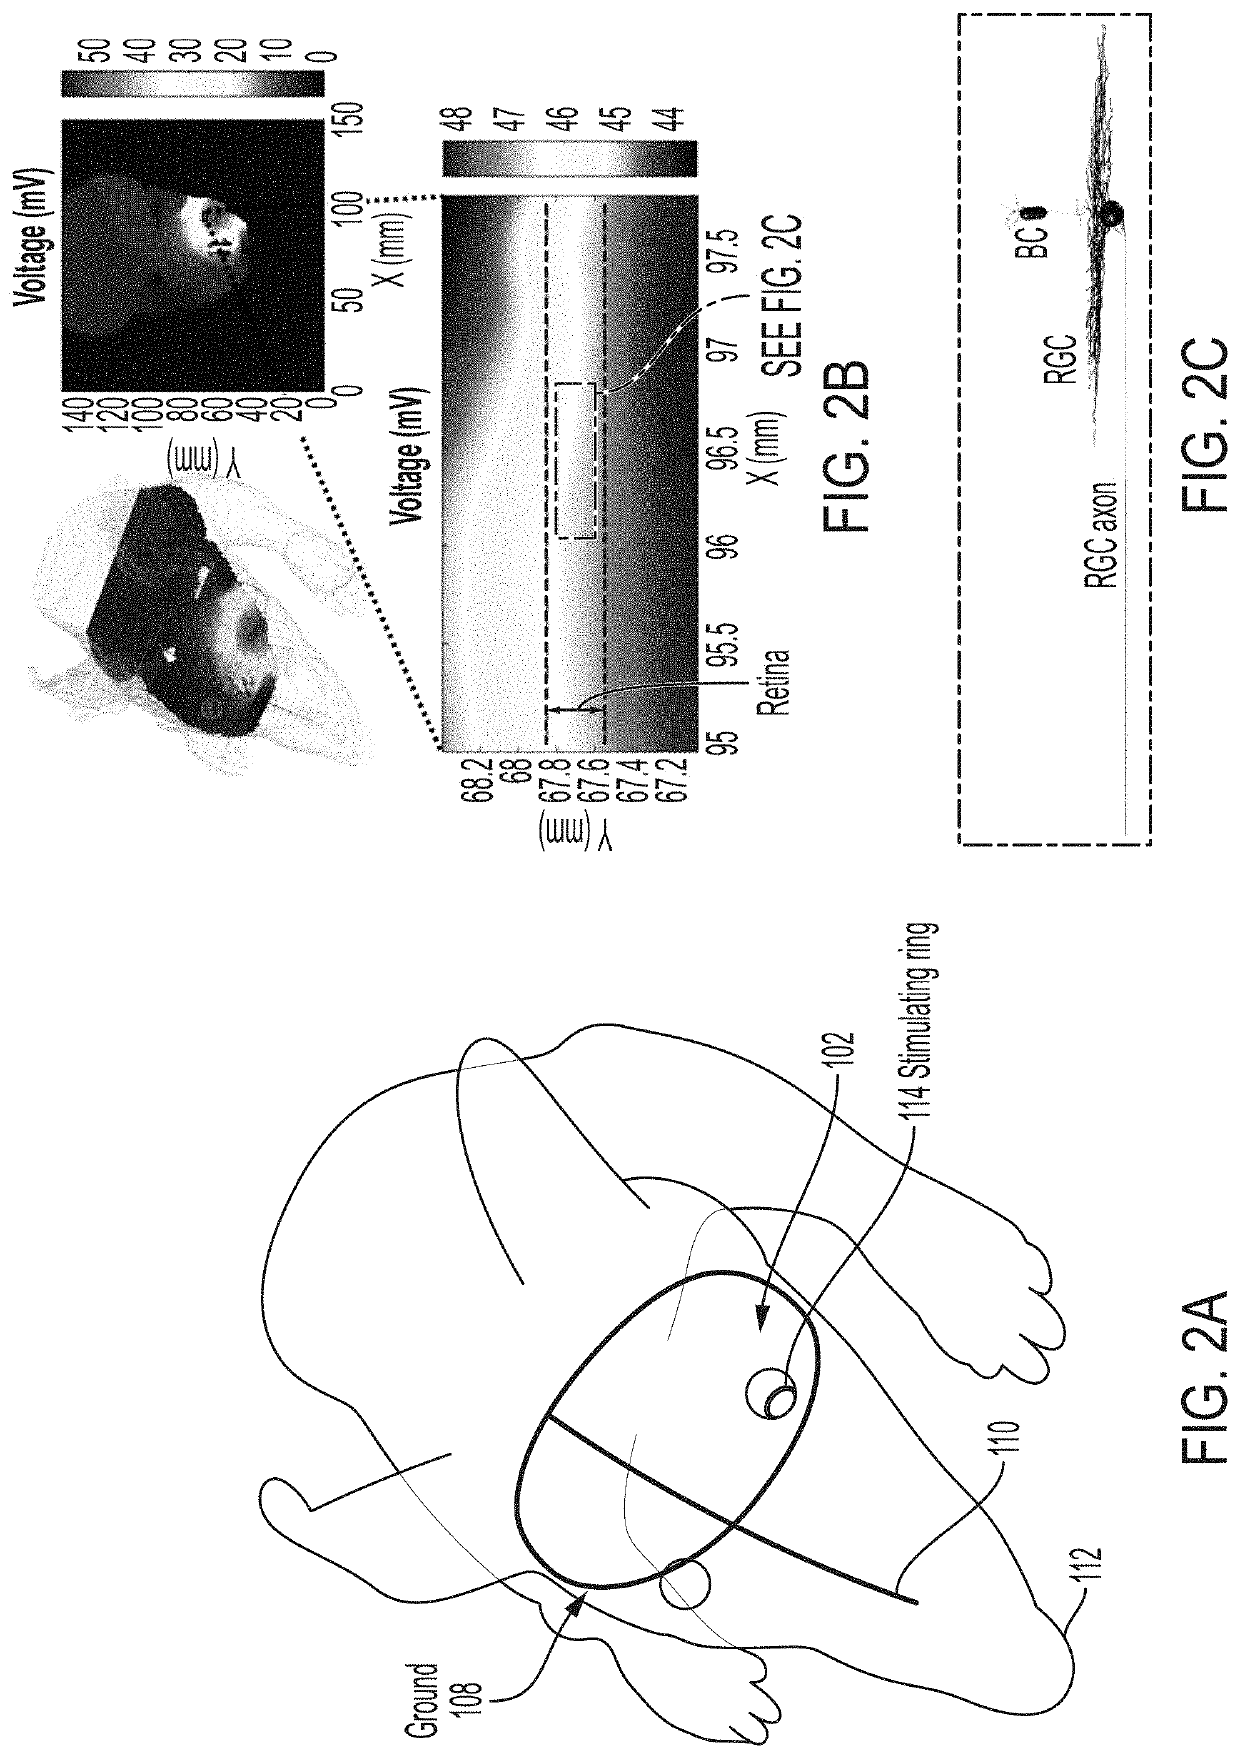 Bioelectronic lens (e-lens) system for electrical stimulation and neuroprotection of the retina